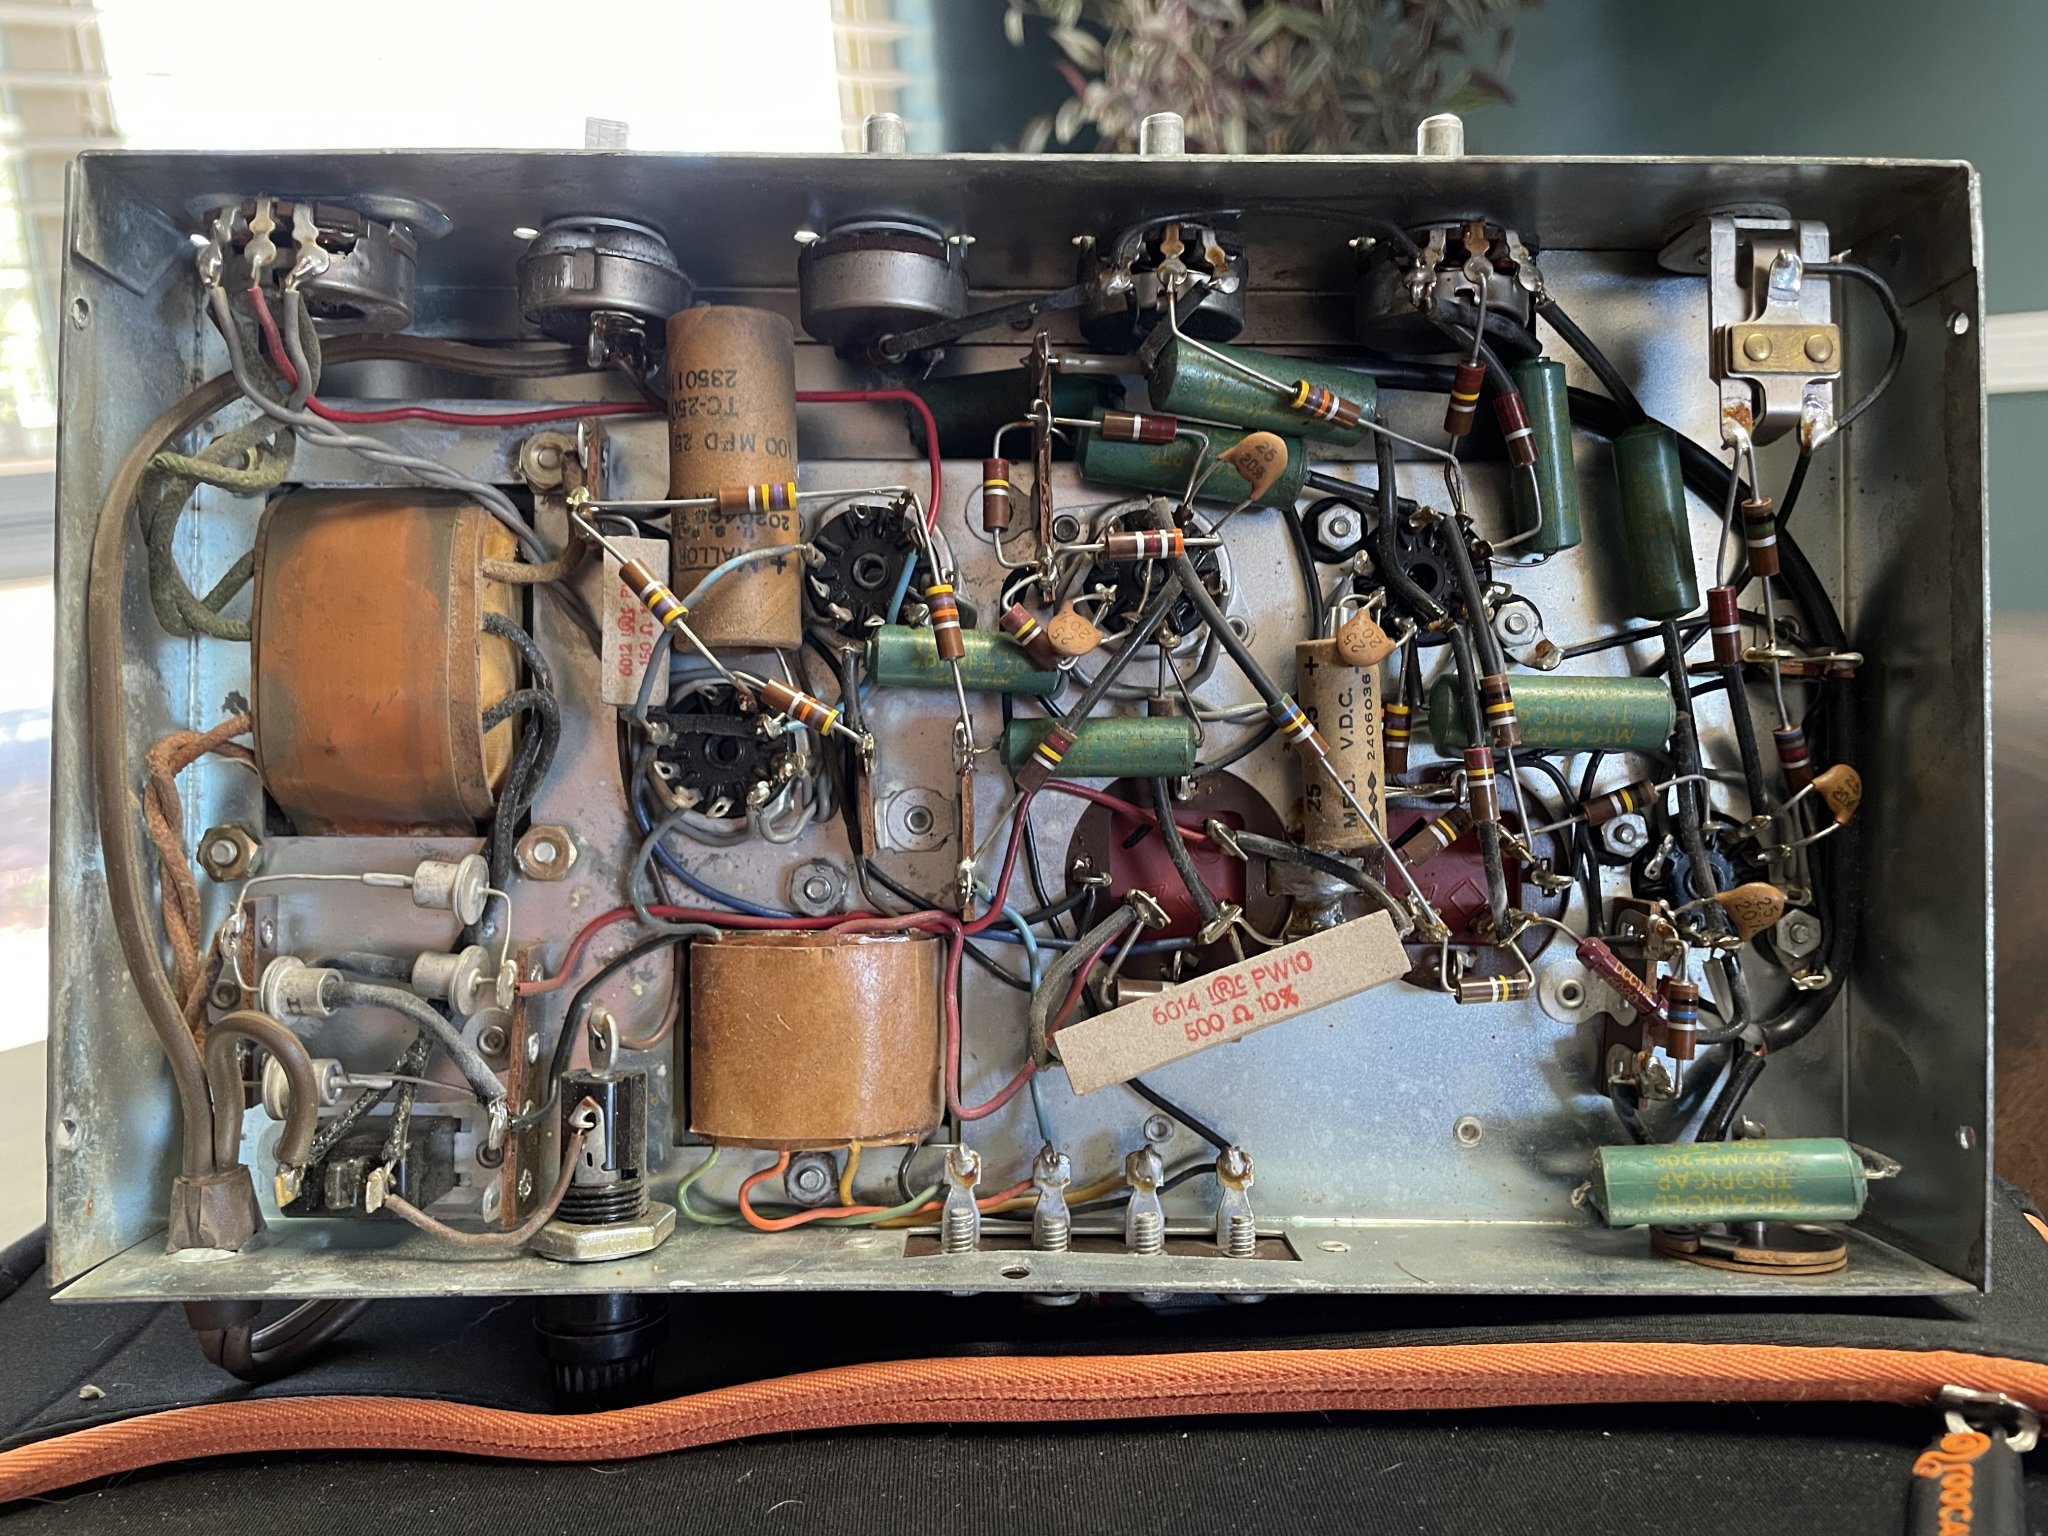 PA guitar amp conversion - could use some insight on mystery tube amp |  diyAudio